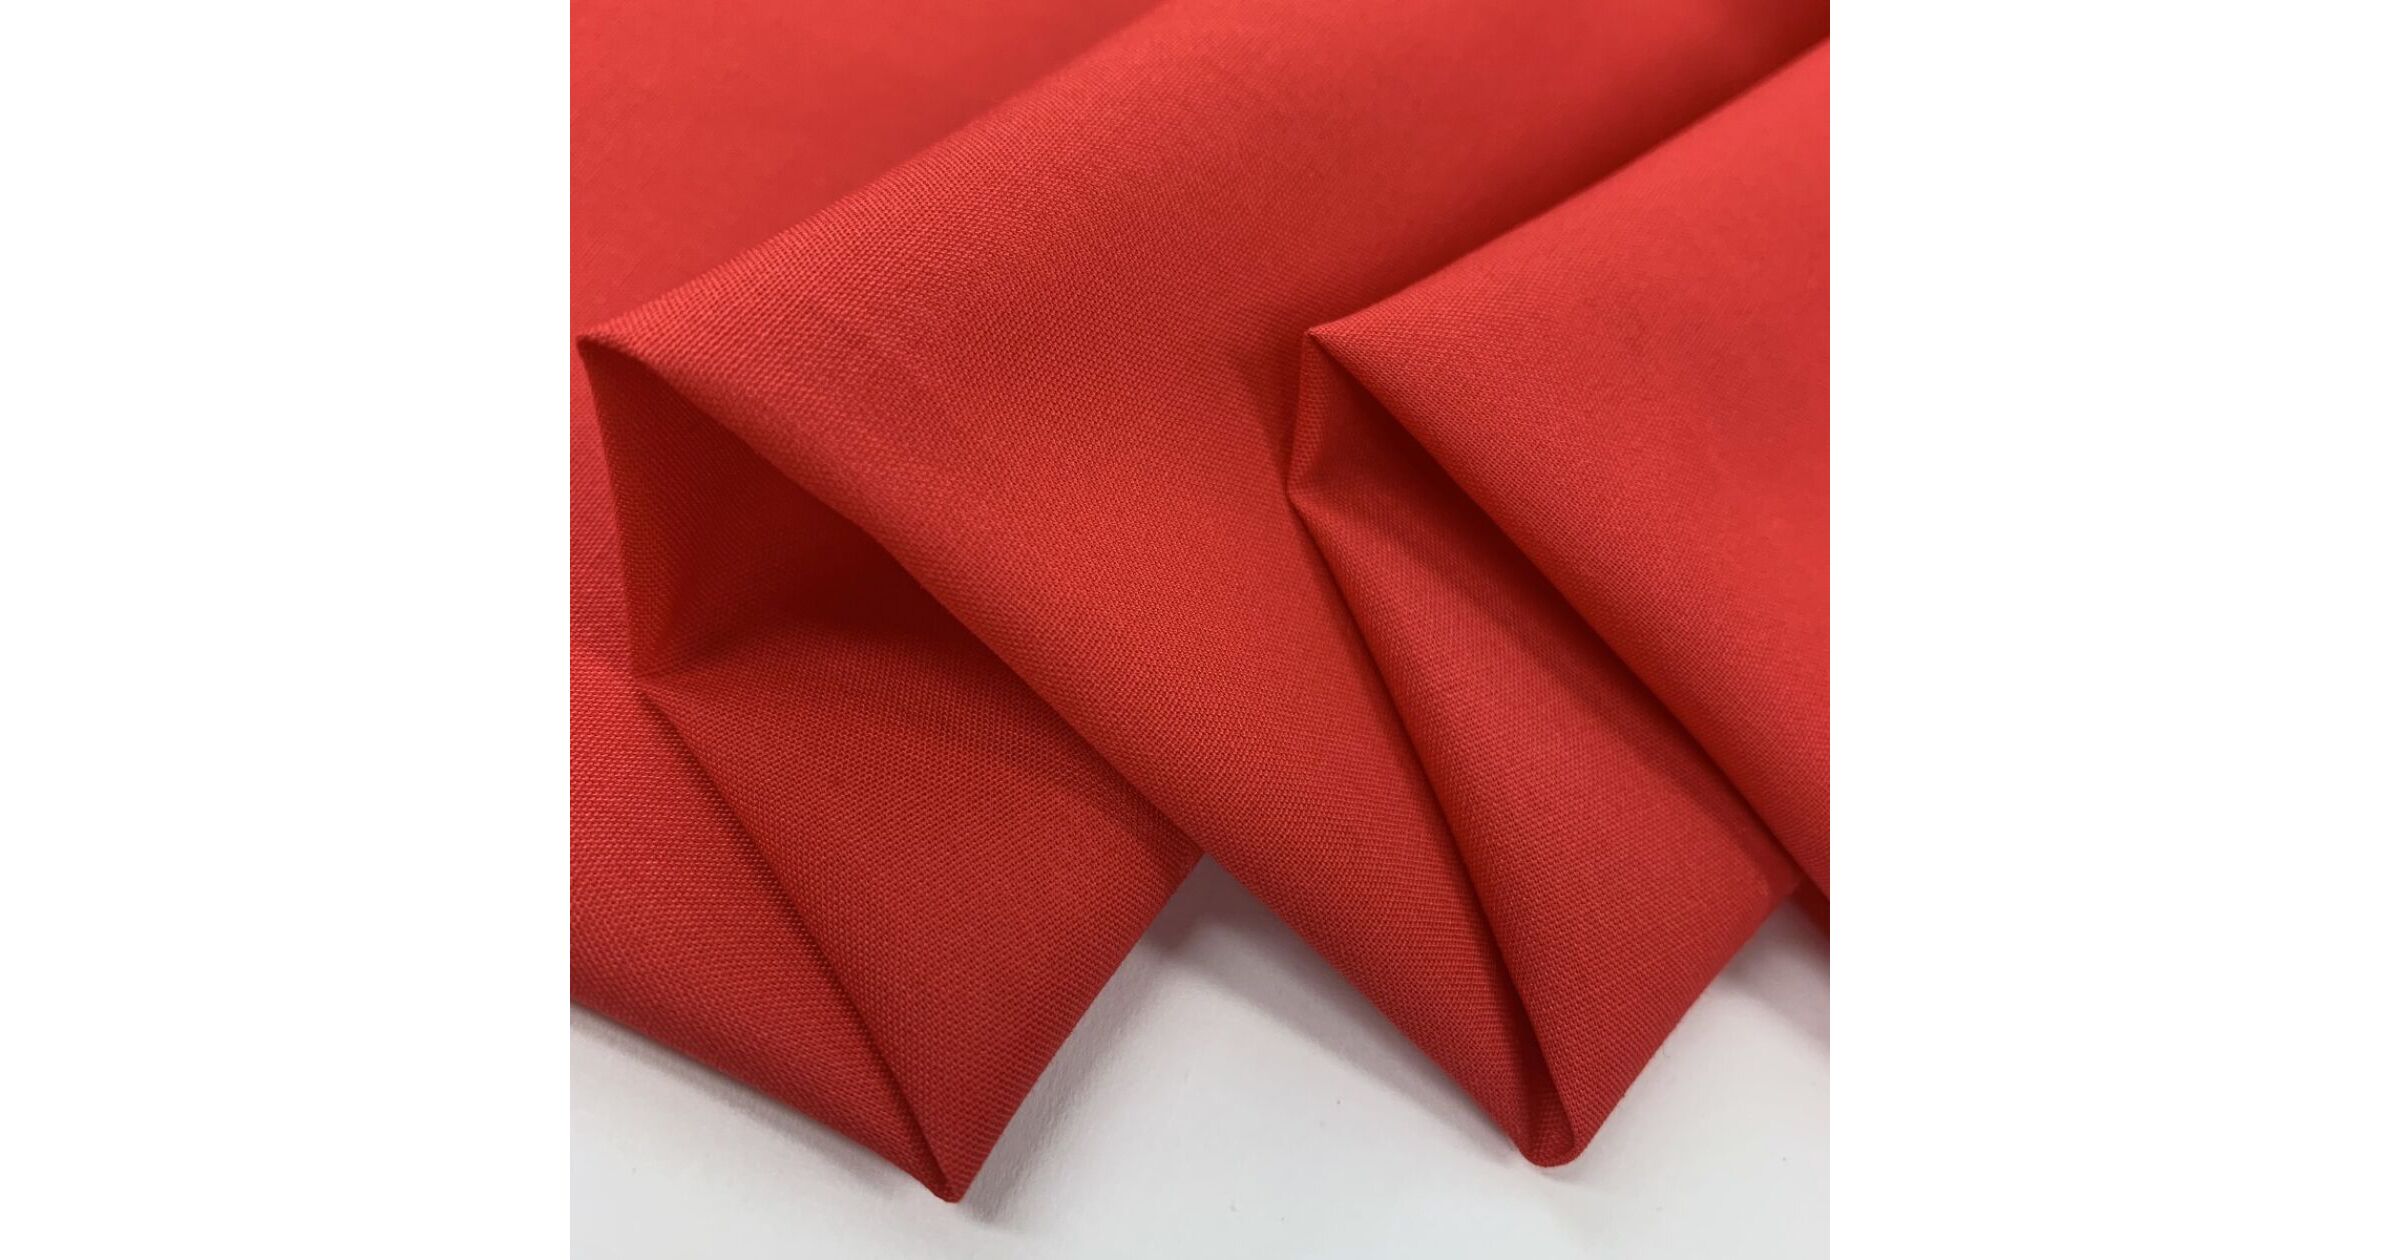 red 65% polyester 35% cotton, lining material, shirting fabric